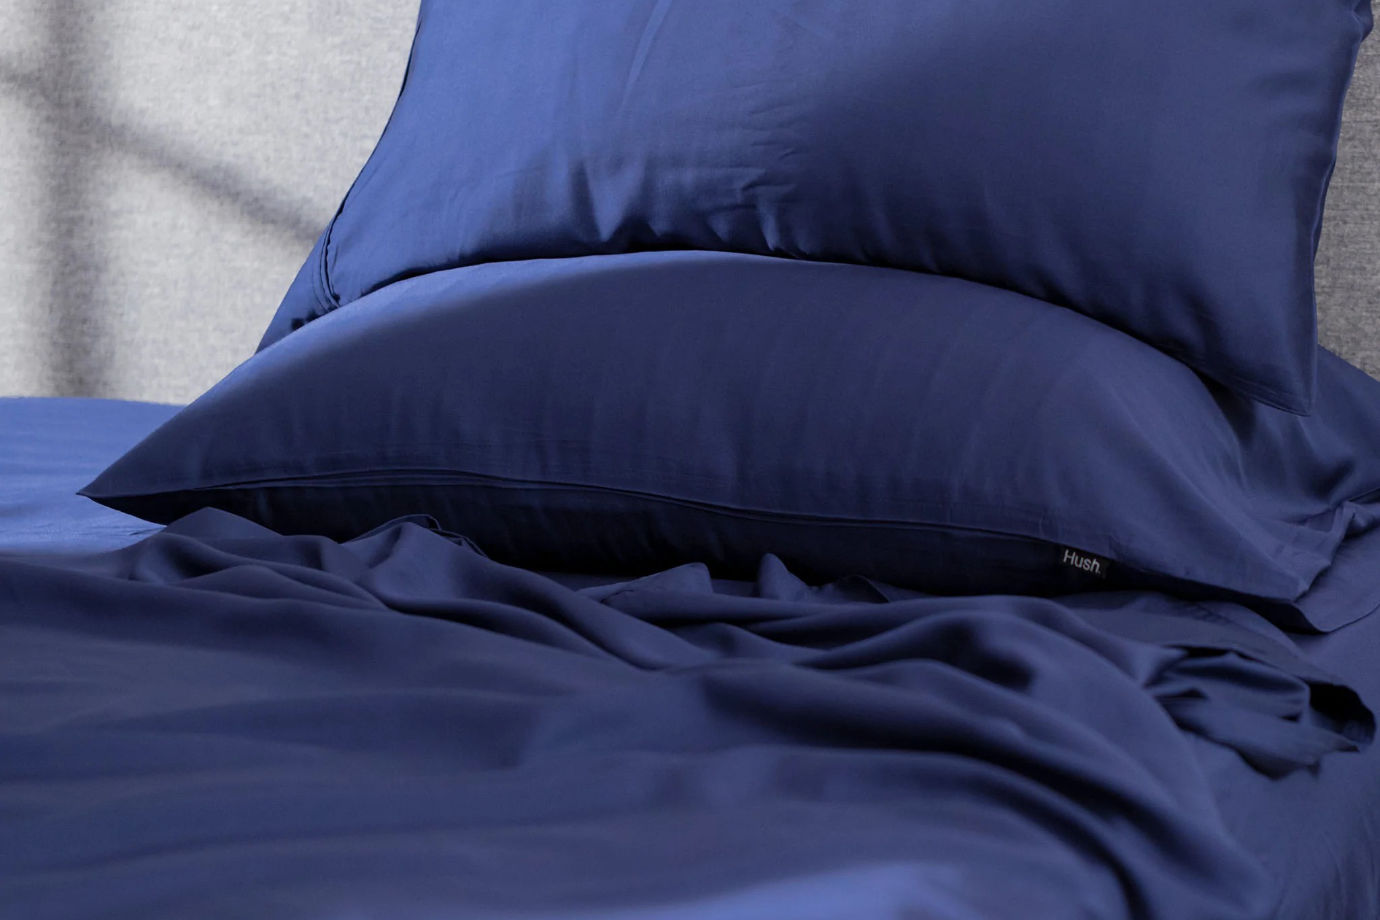 Navy blue Hush Iced sheets and pillowcases